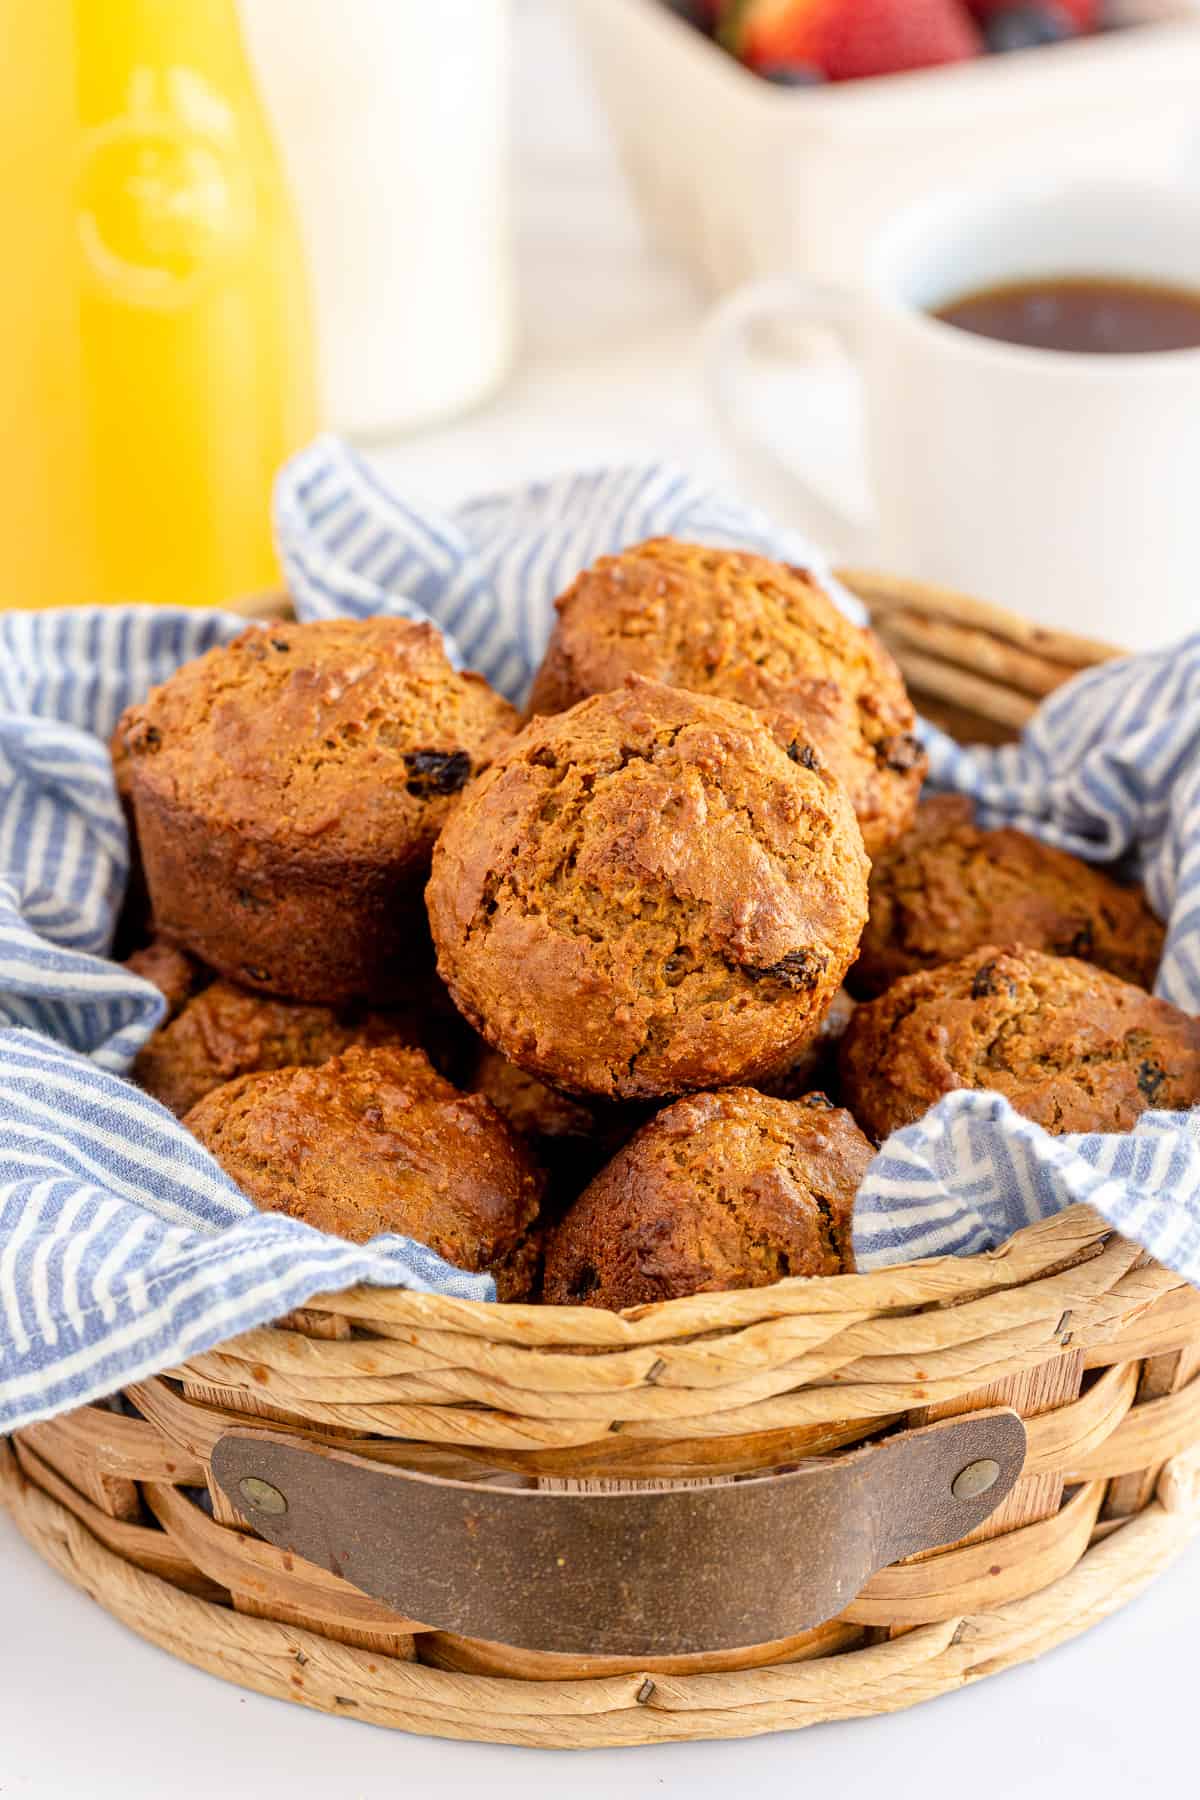 A basket lined with a blue cloth and filled with bran muffins.